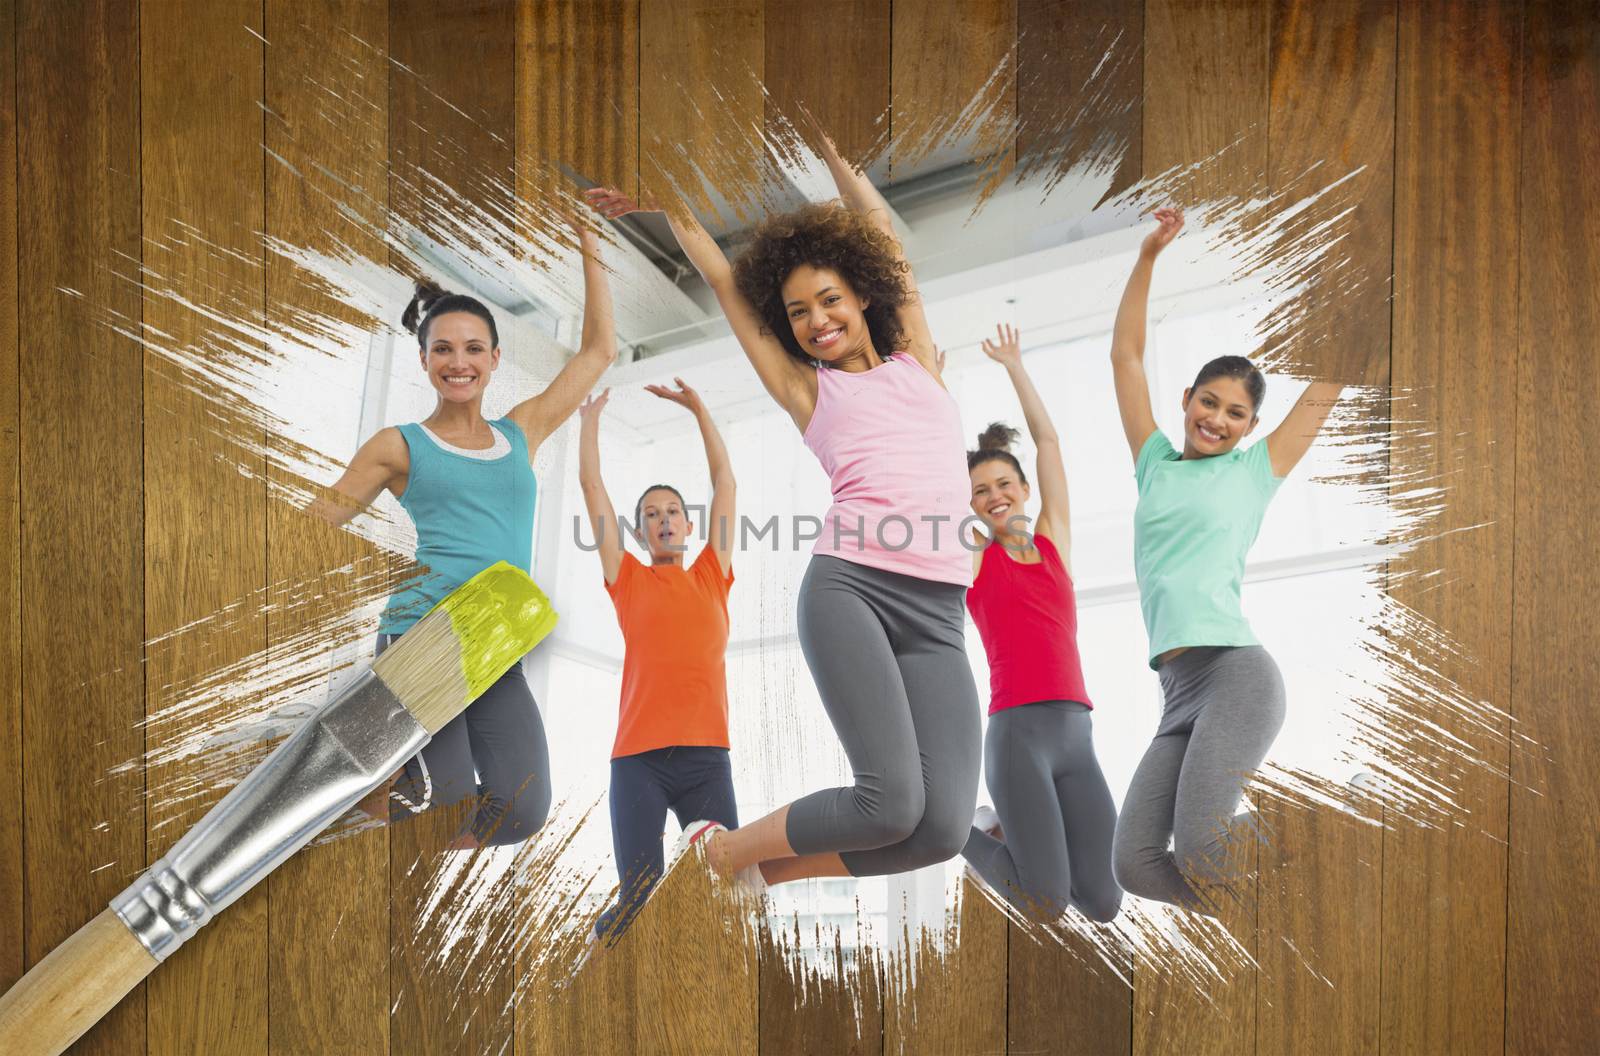 Composite image of fitness class at the gym with paintbrush dipped in yellow against wooden surface with planks